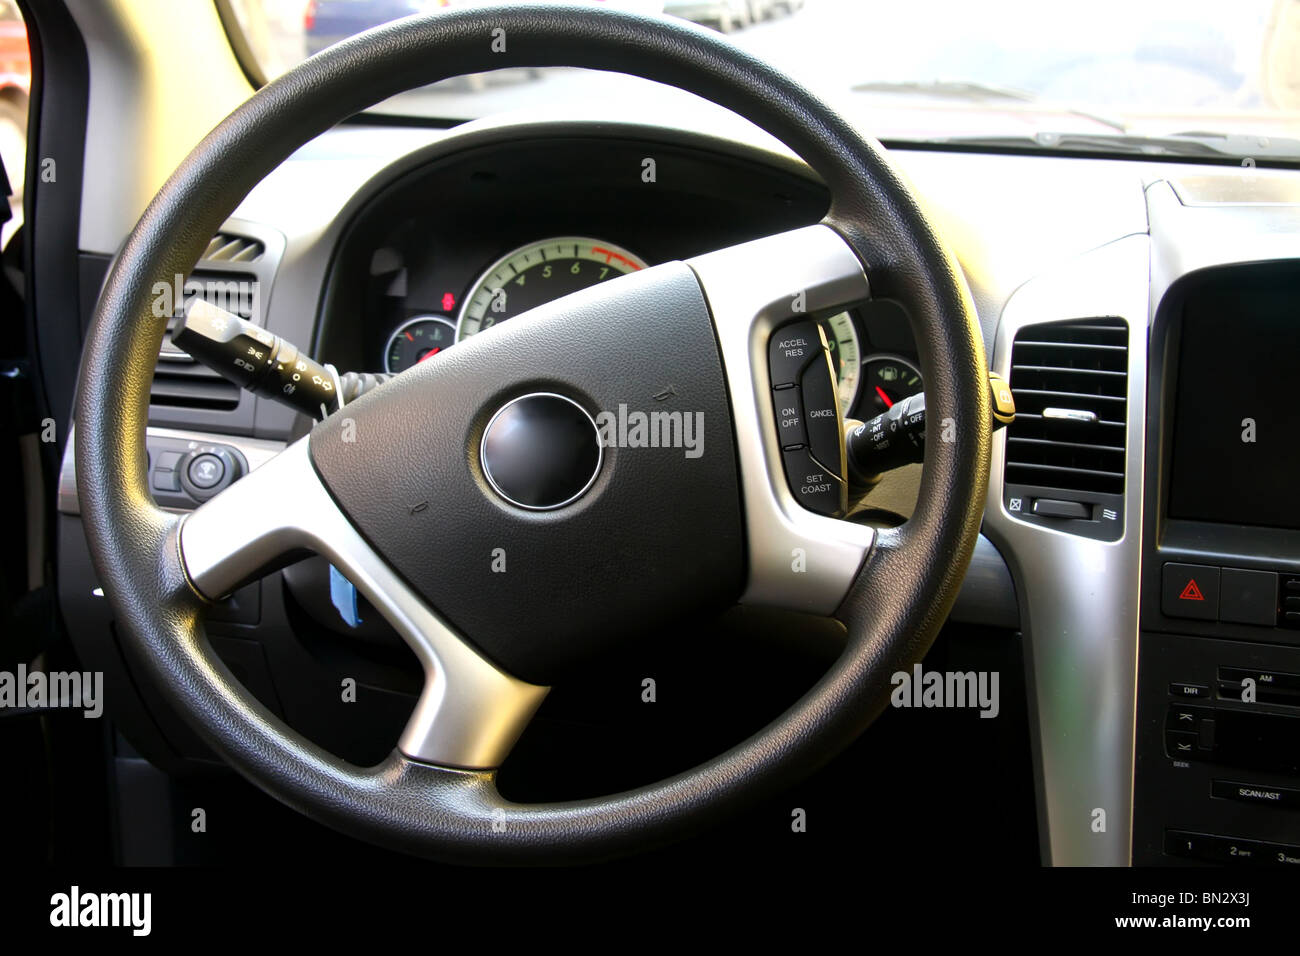 Steering wheel and dashboard of a vehicle interior Stock Photo